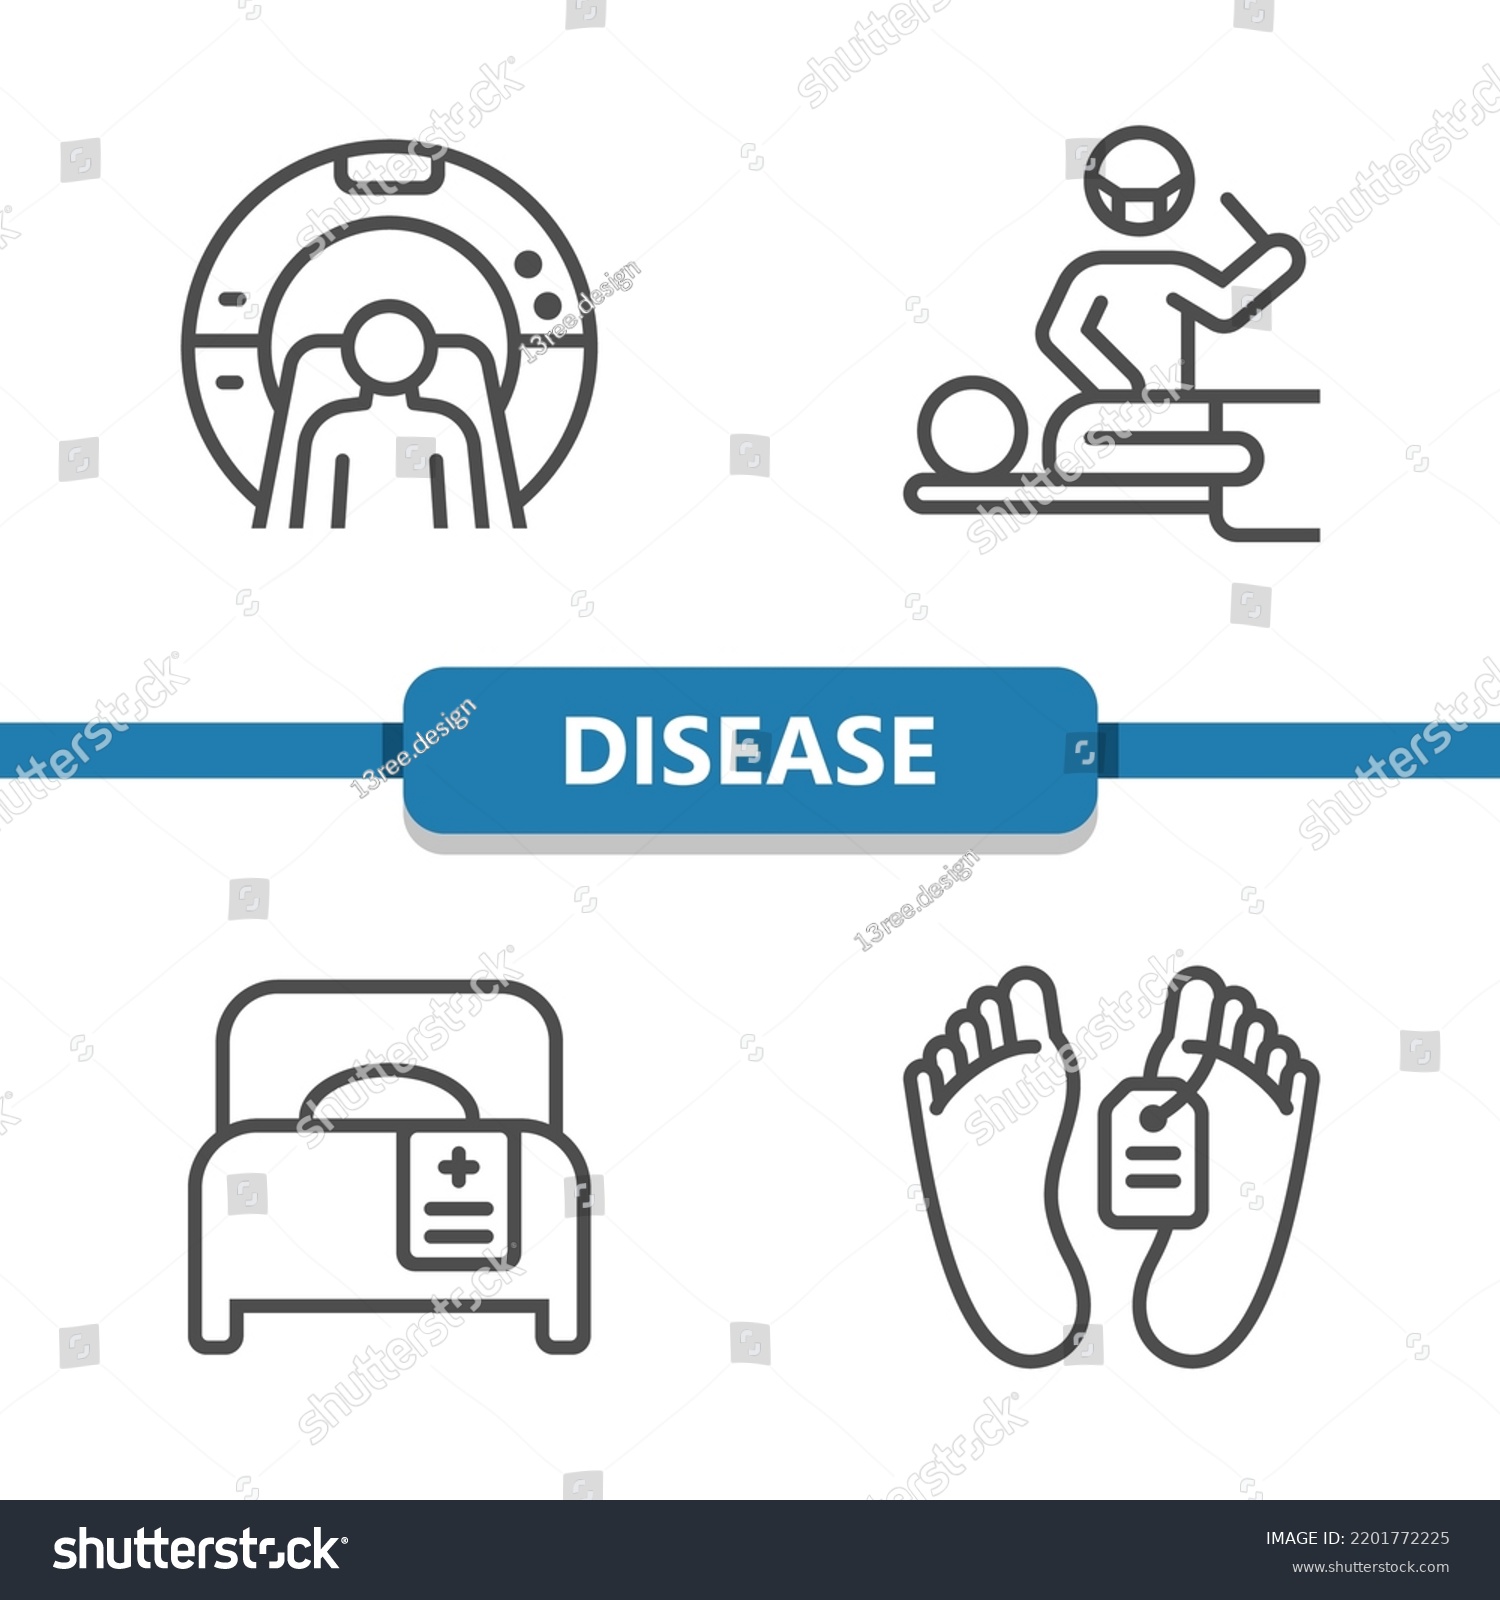 SVG of Disease, Healthcare, Health Care, Medical Icons. Professional, pixel perfect icons. EPS 10 format. svg